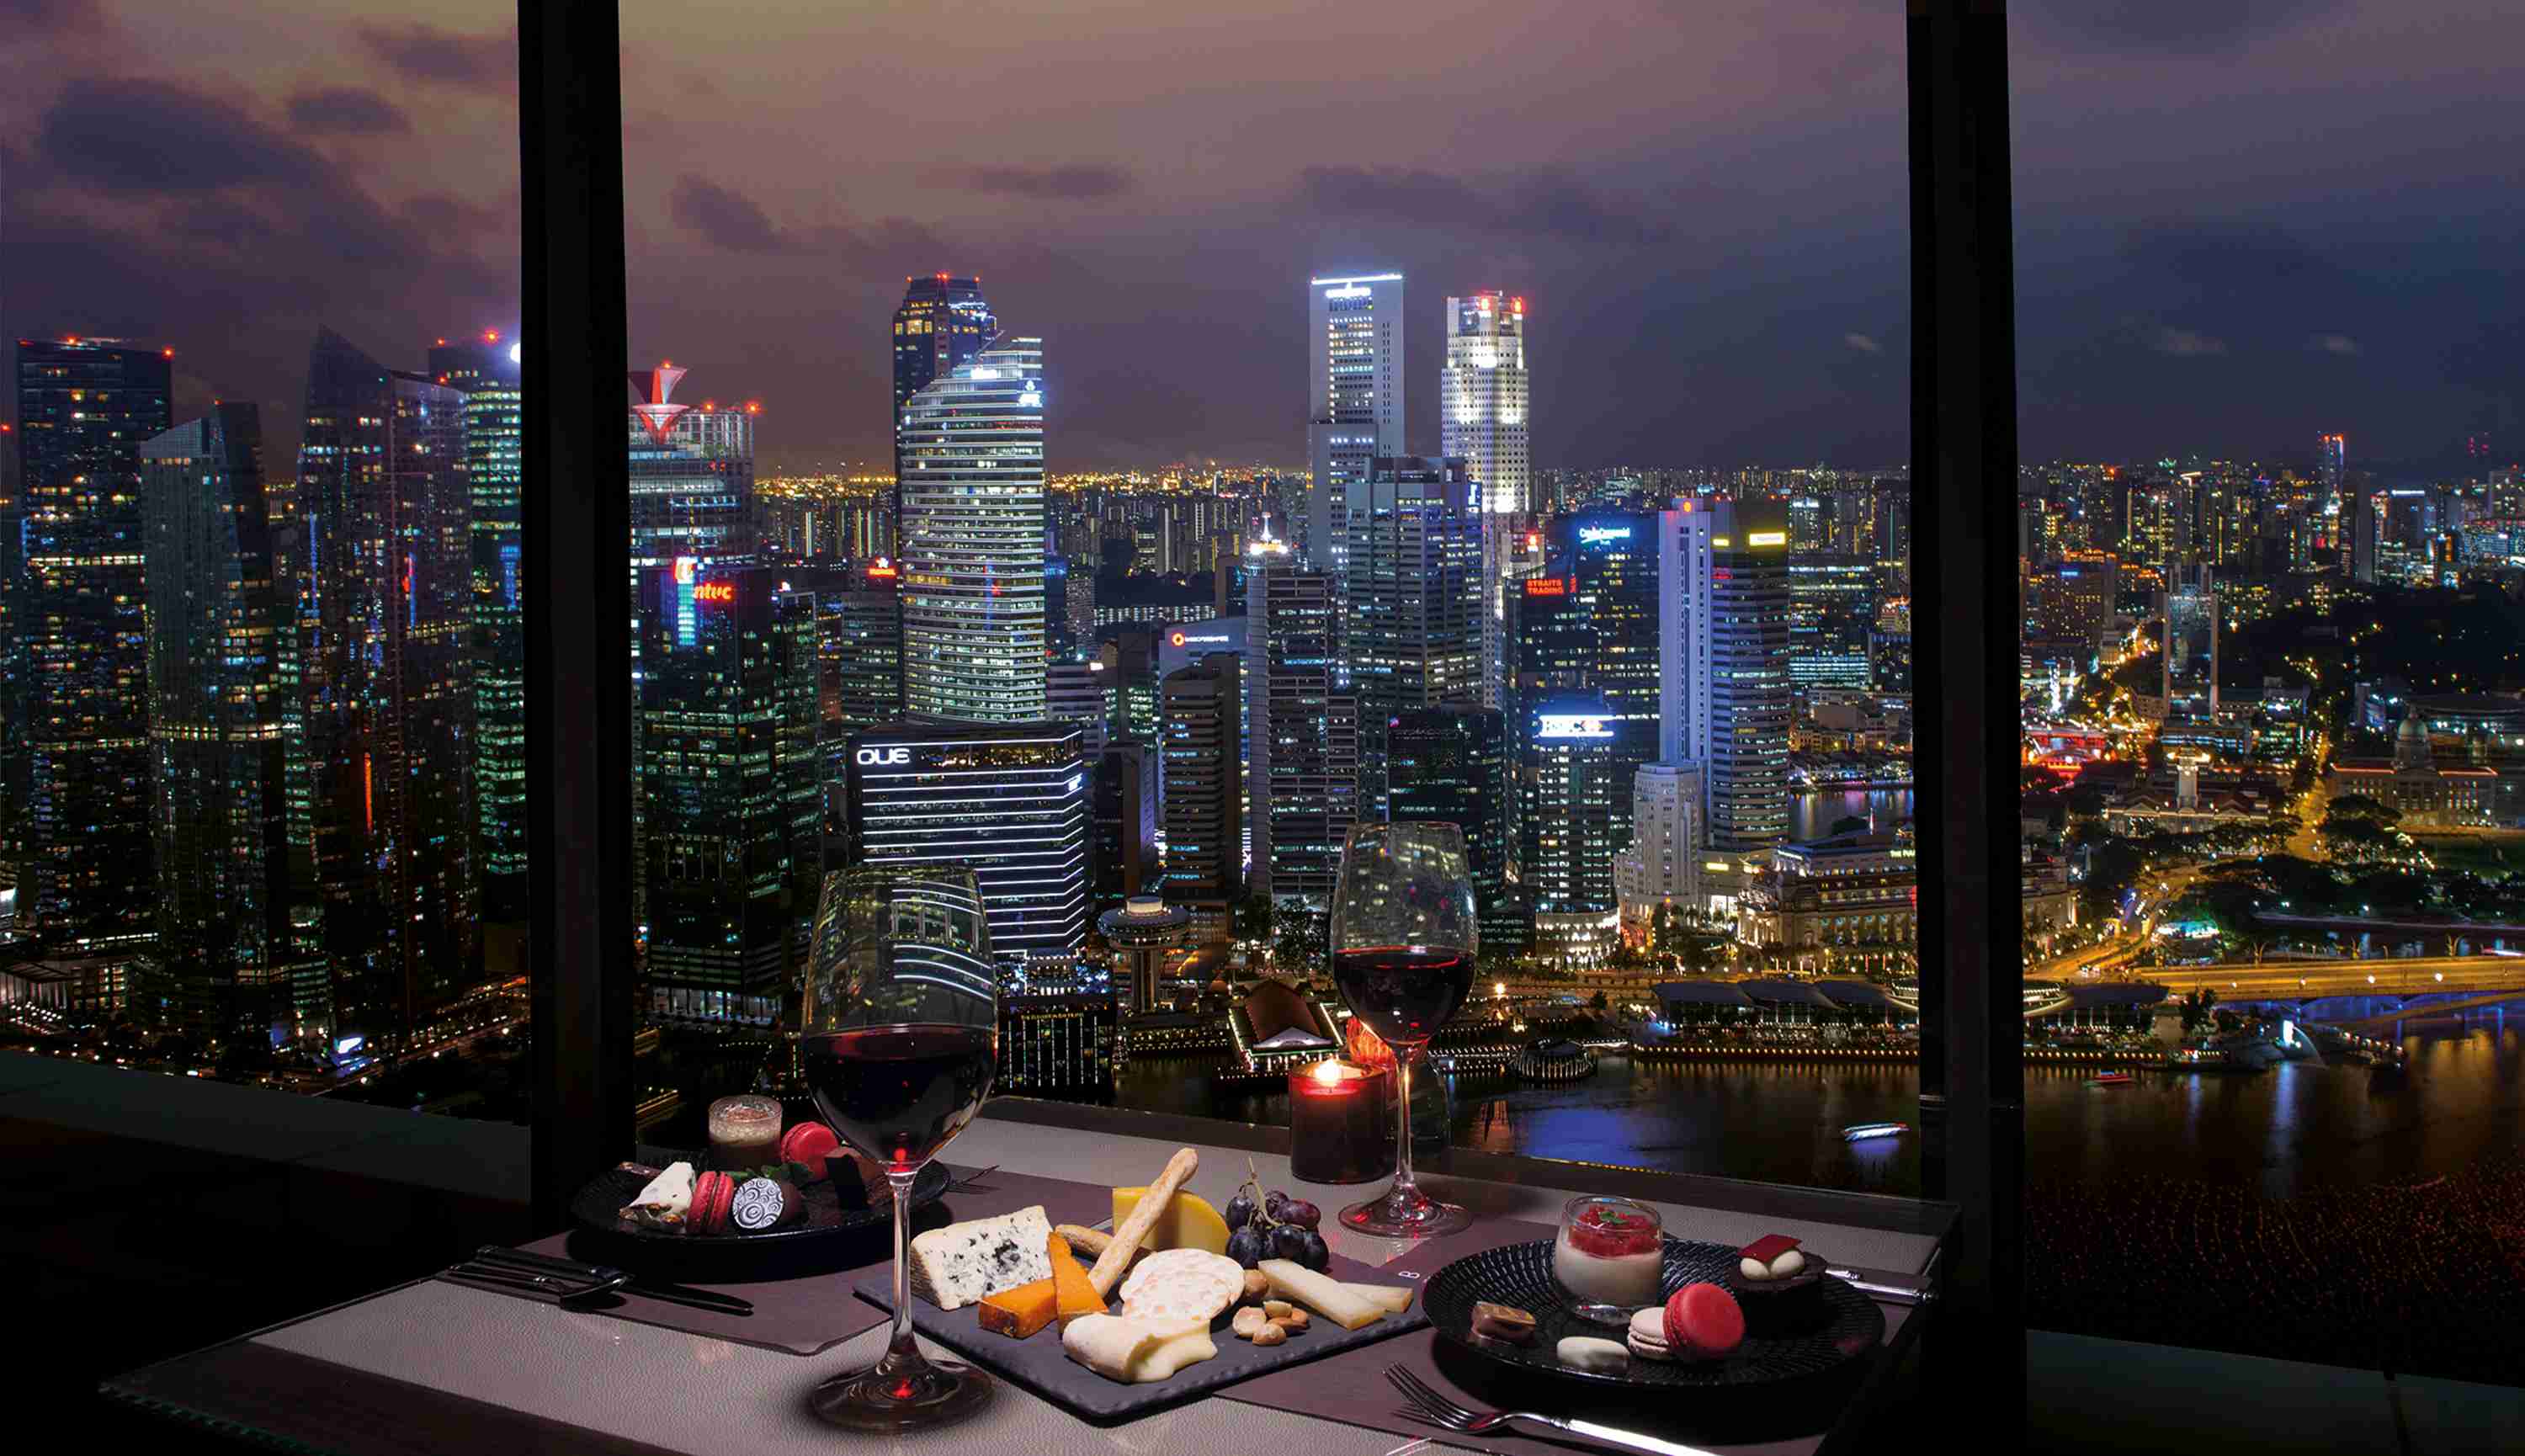 Club55 – Cheese and Chocolate buffet with Night View